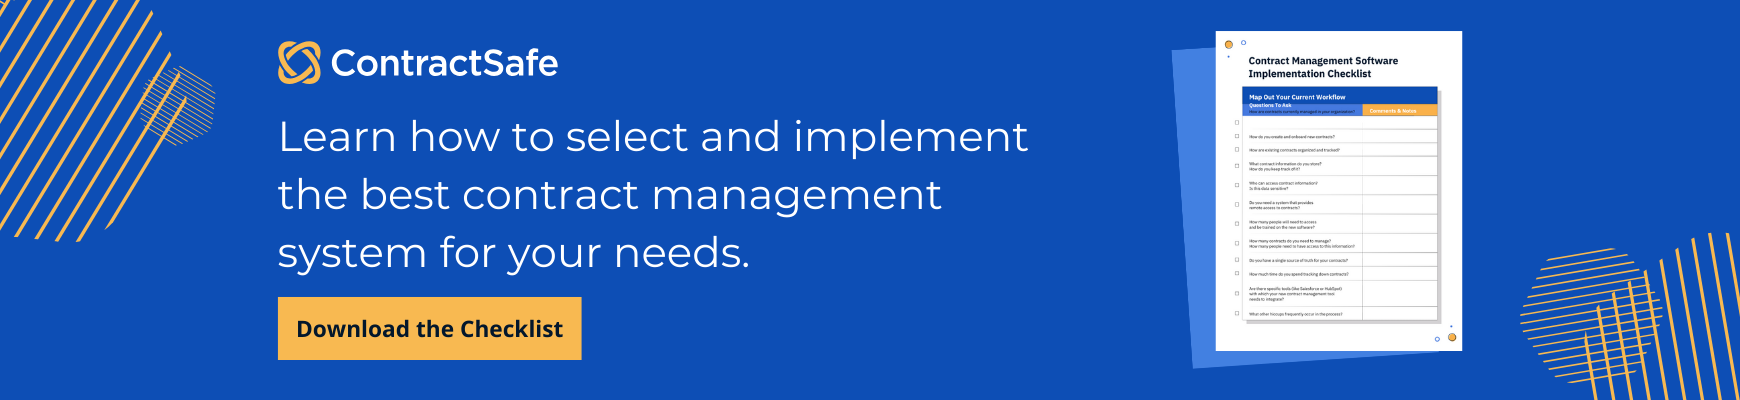 Learn how to select and implement the best contract management system for your needs.